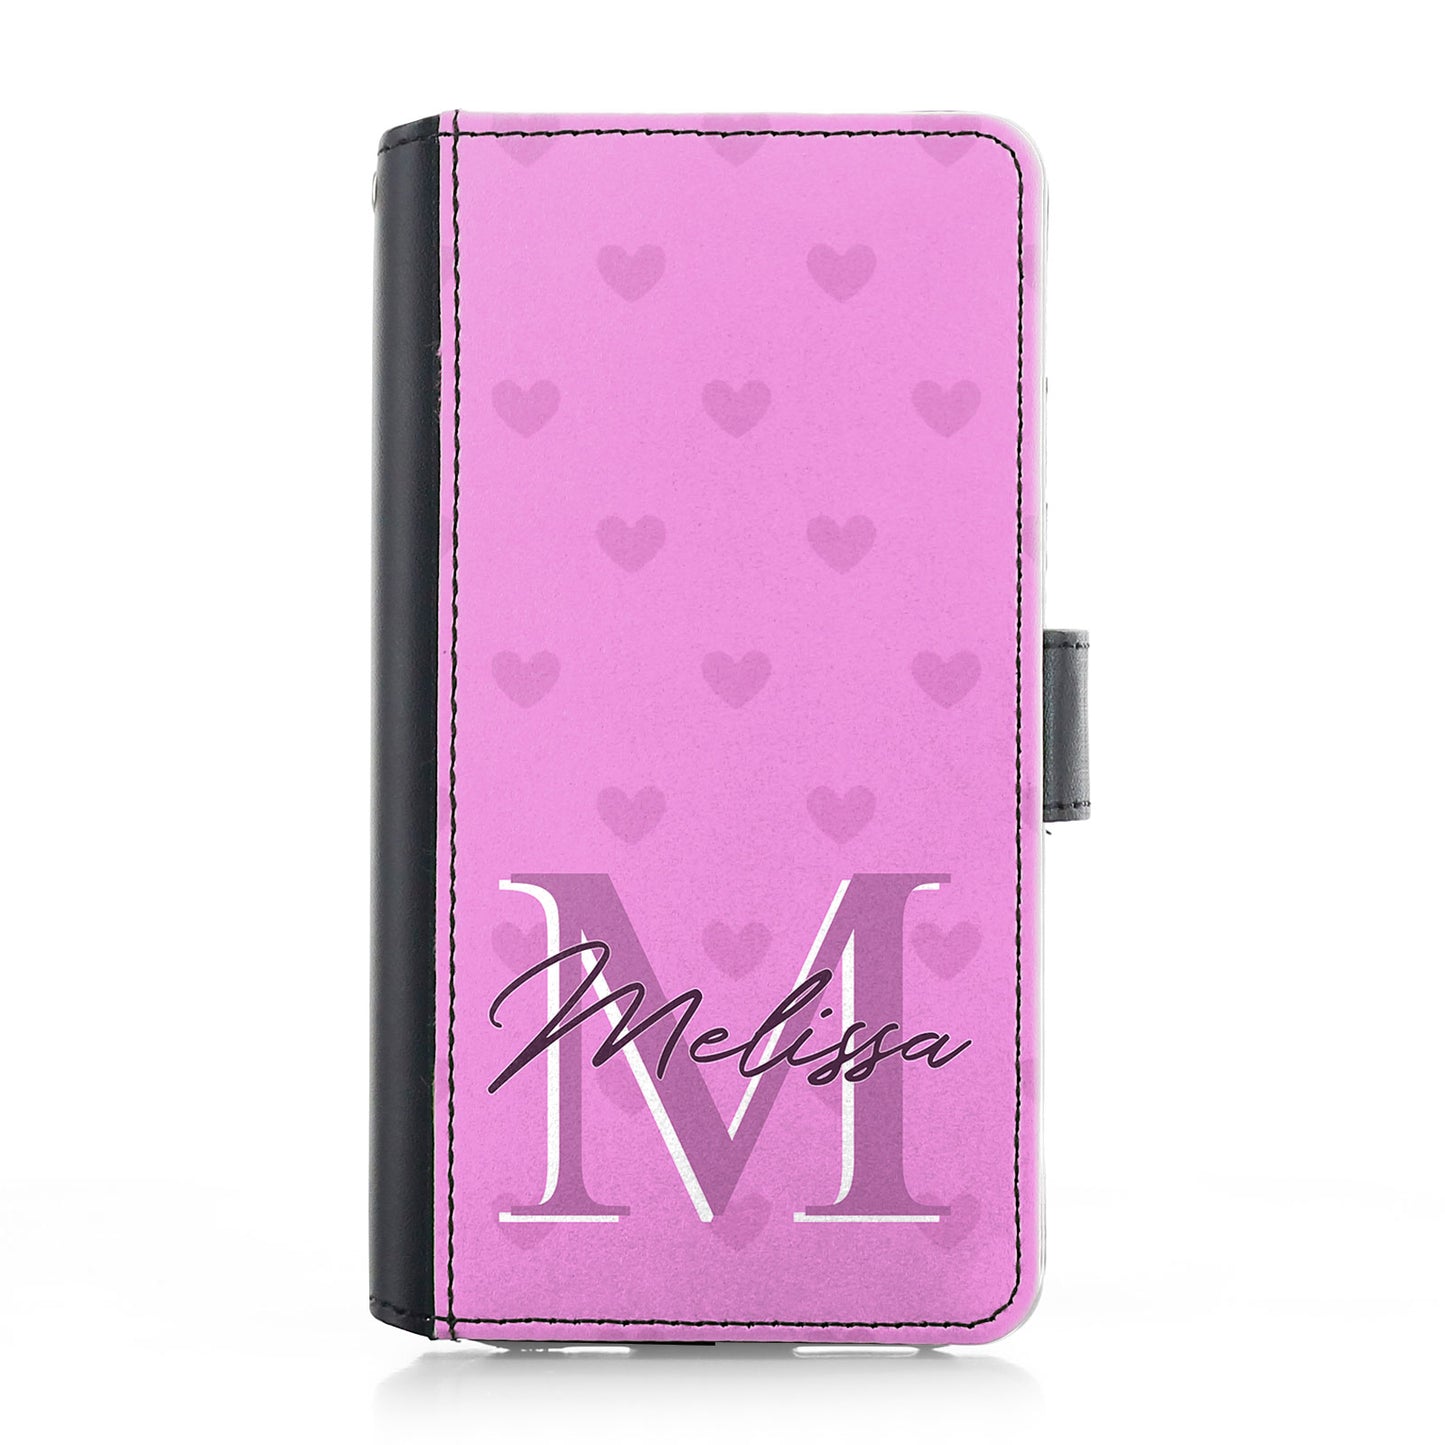 Personalised iPhone Leather Case - Pink Heart Monogram and Name